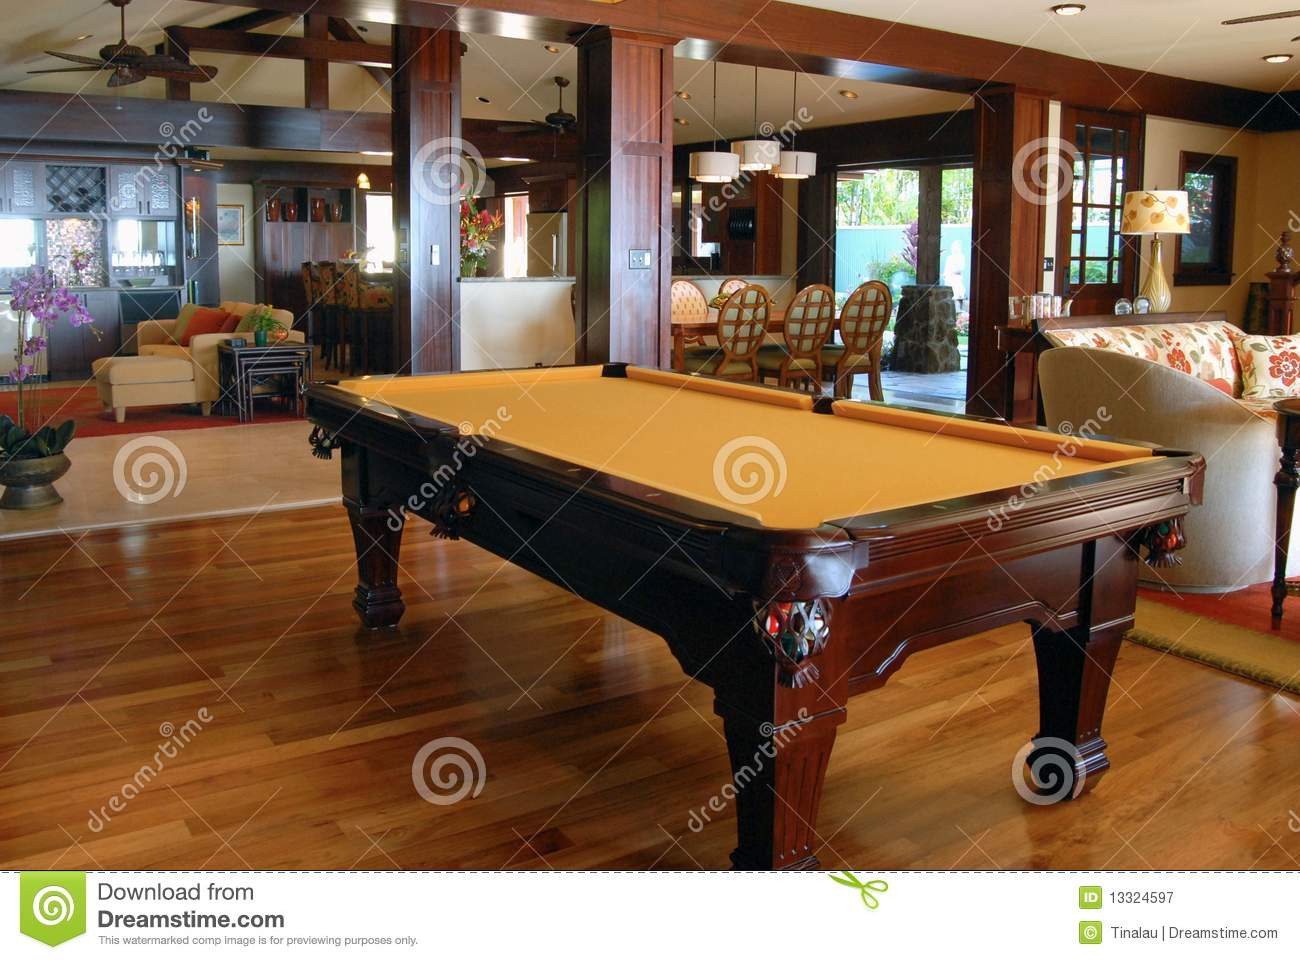 Pool Table In Living Room
 Pool Table In The Living Room Royalty Free Stock